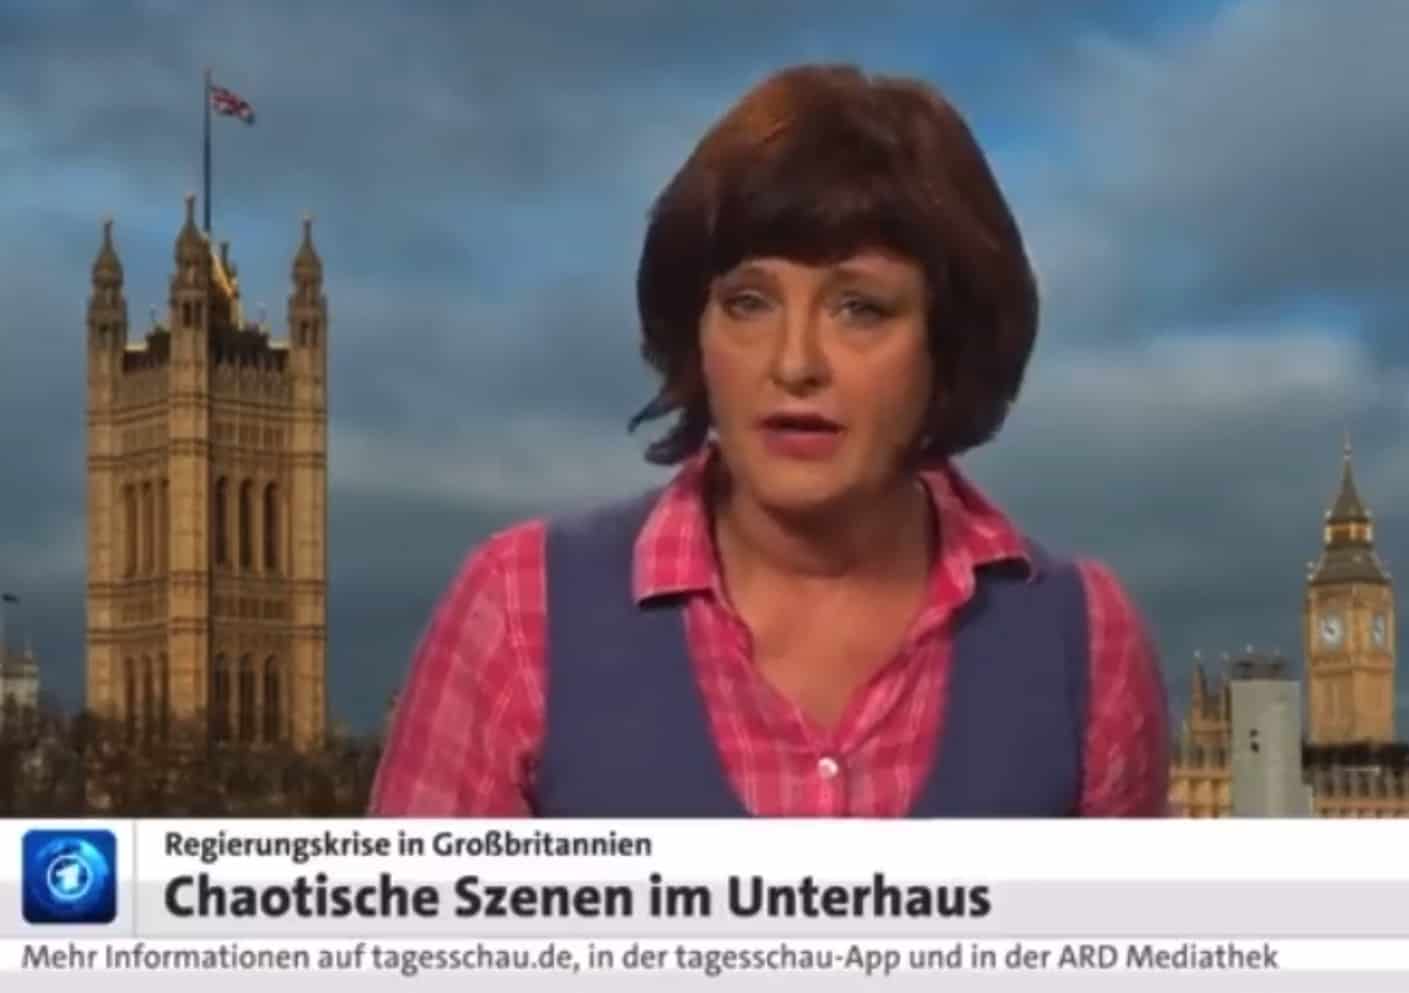 German TV presenter reading Whittaker’s fuming comments is a thing of beauty